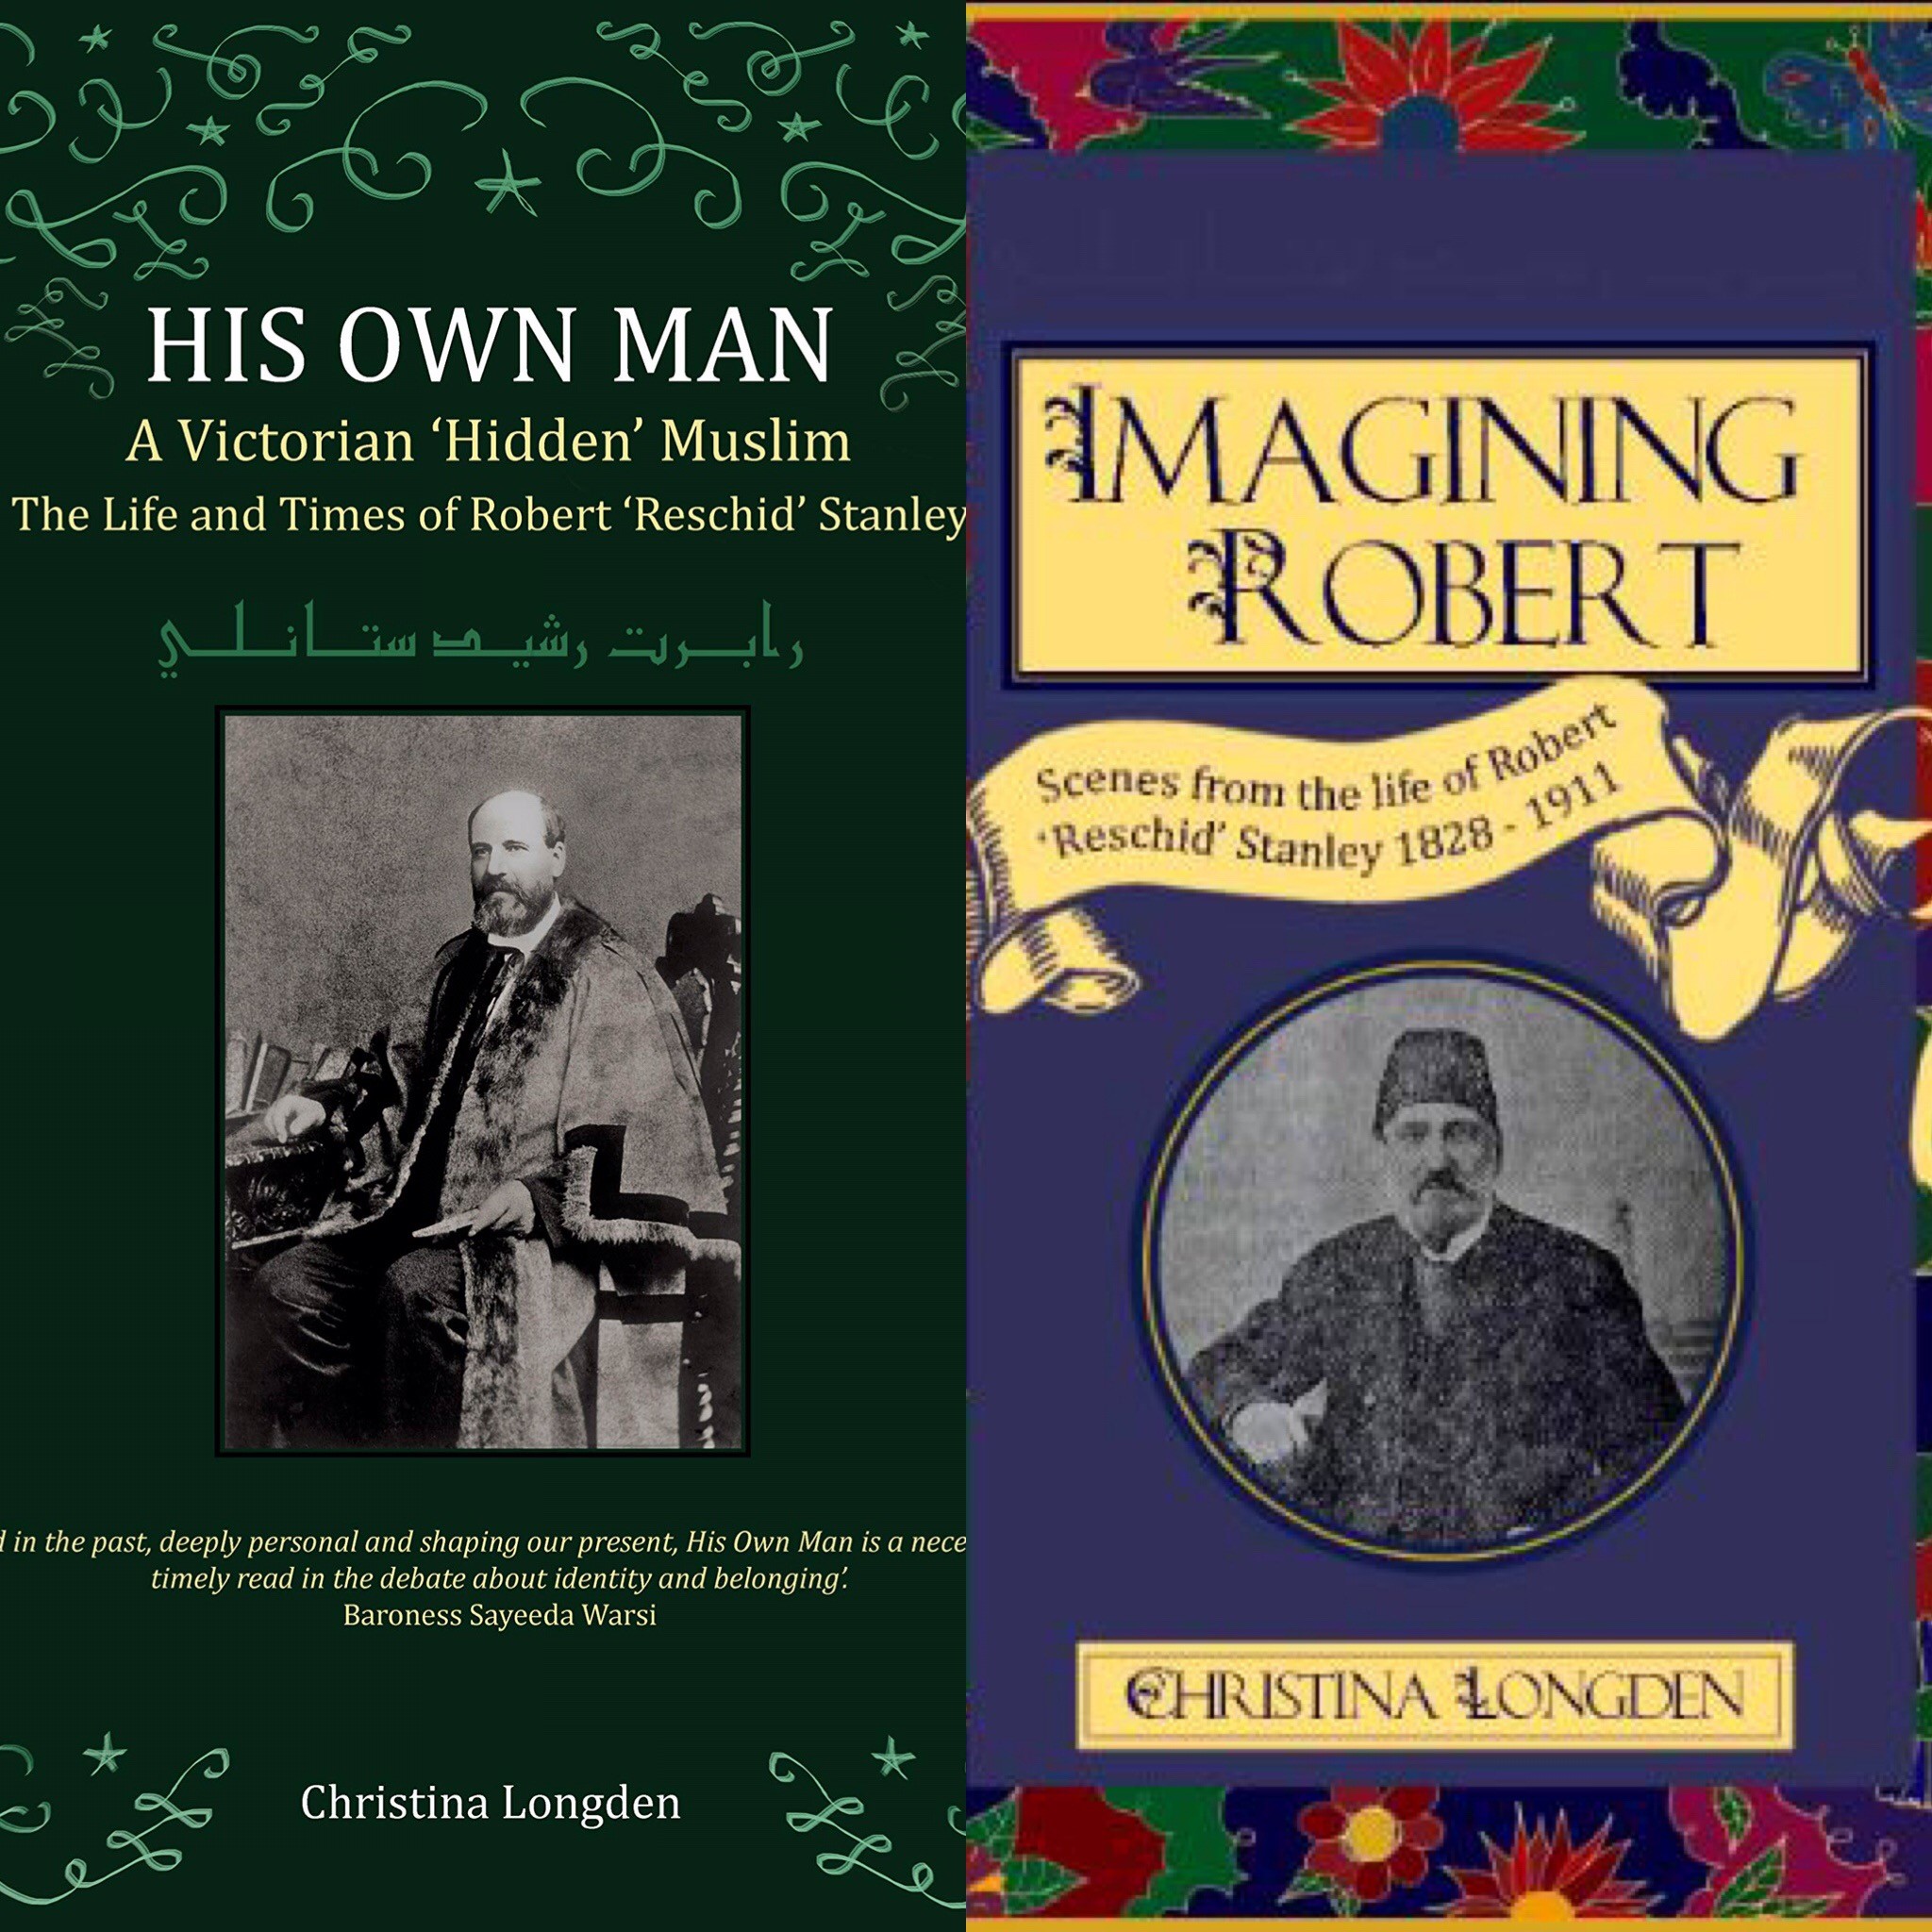 Front covers of the two books being launched at the event